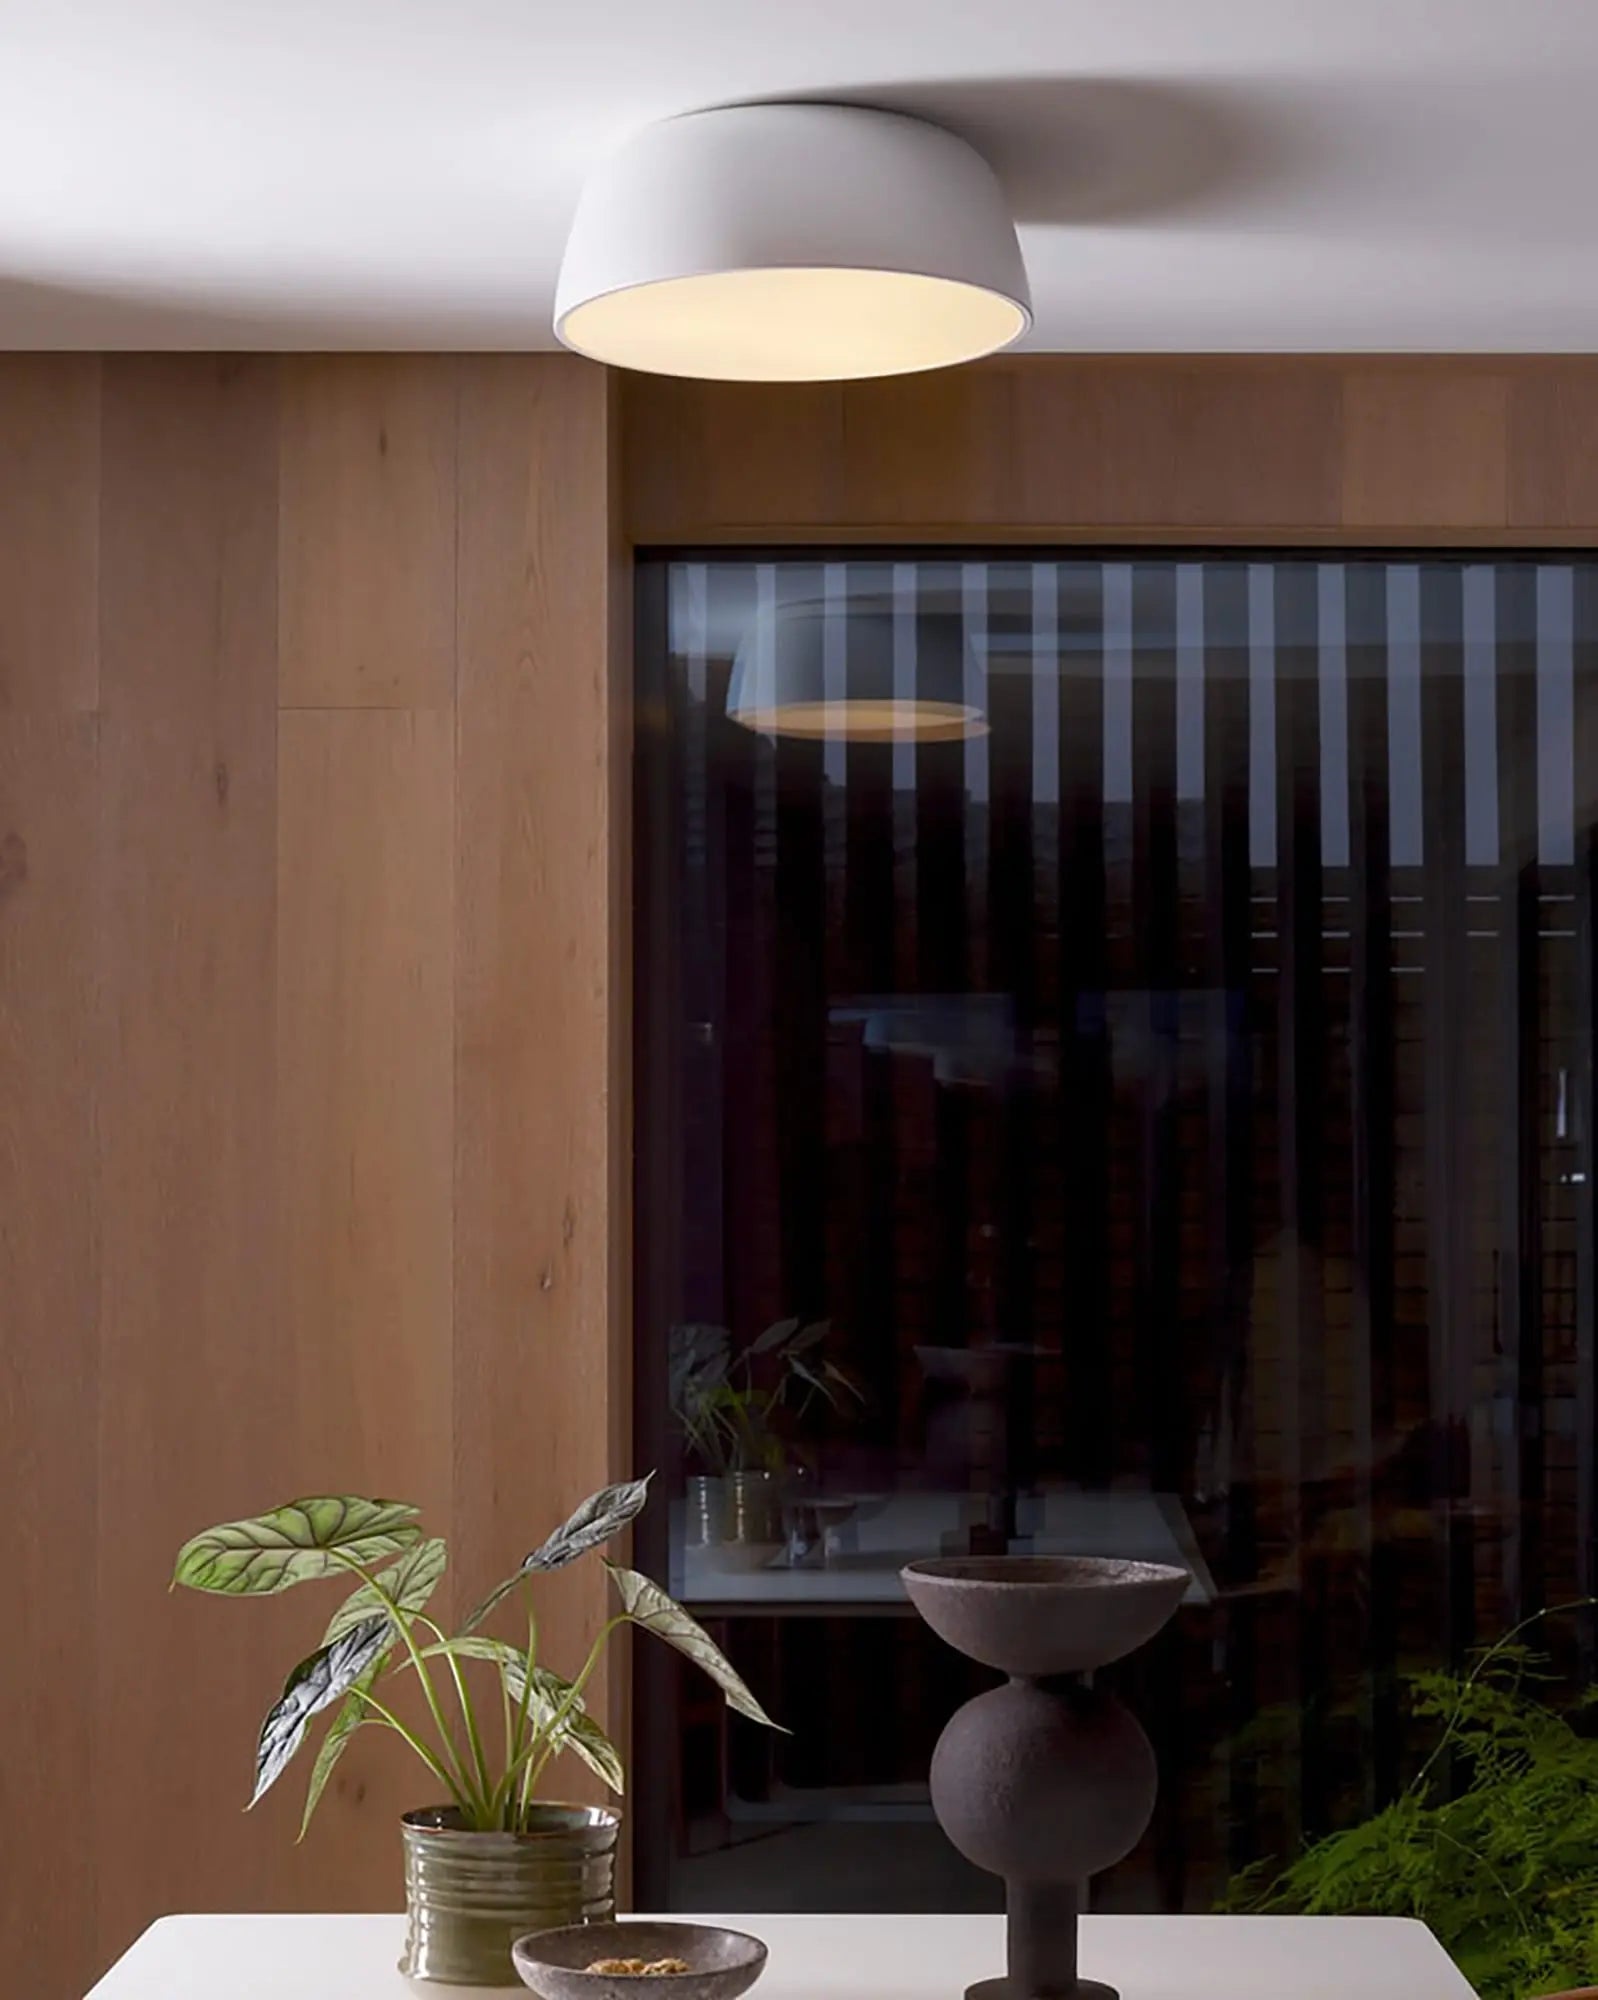 Taiko Ceiling light above a dining table